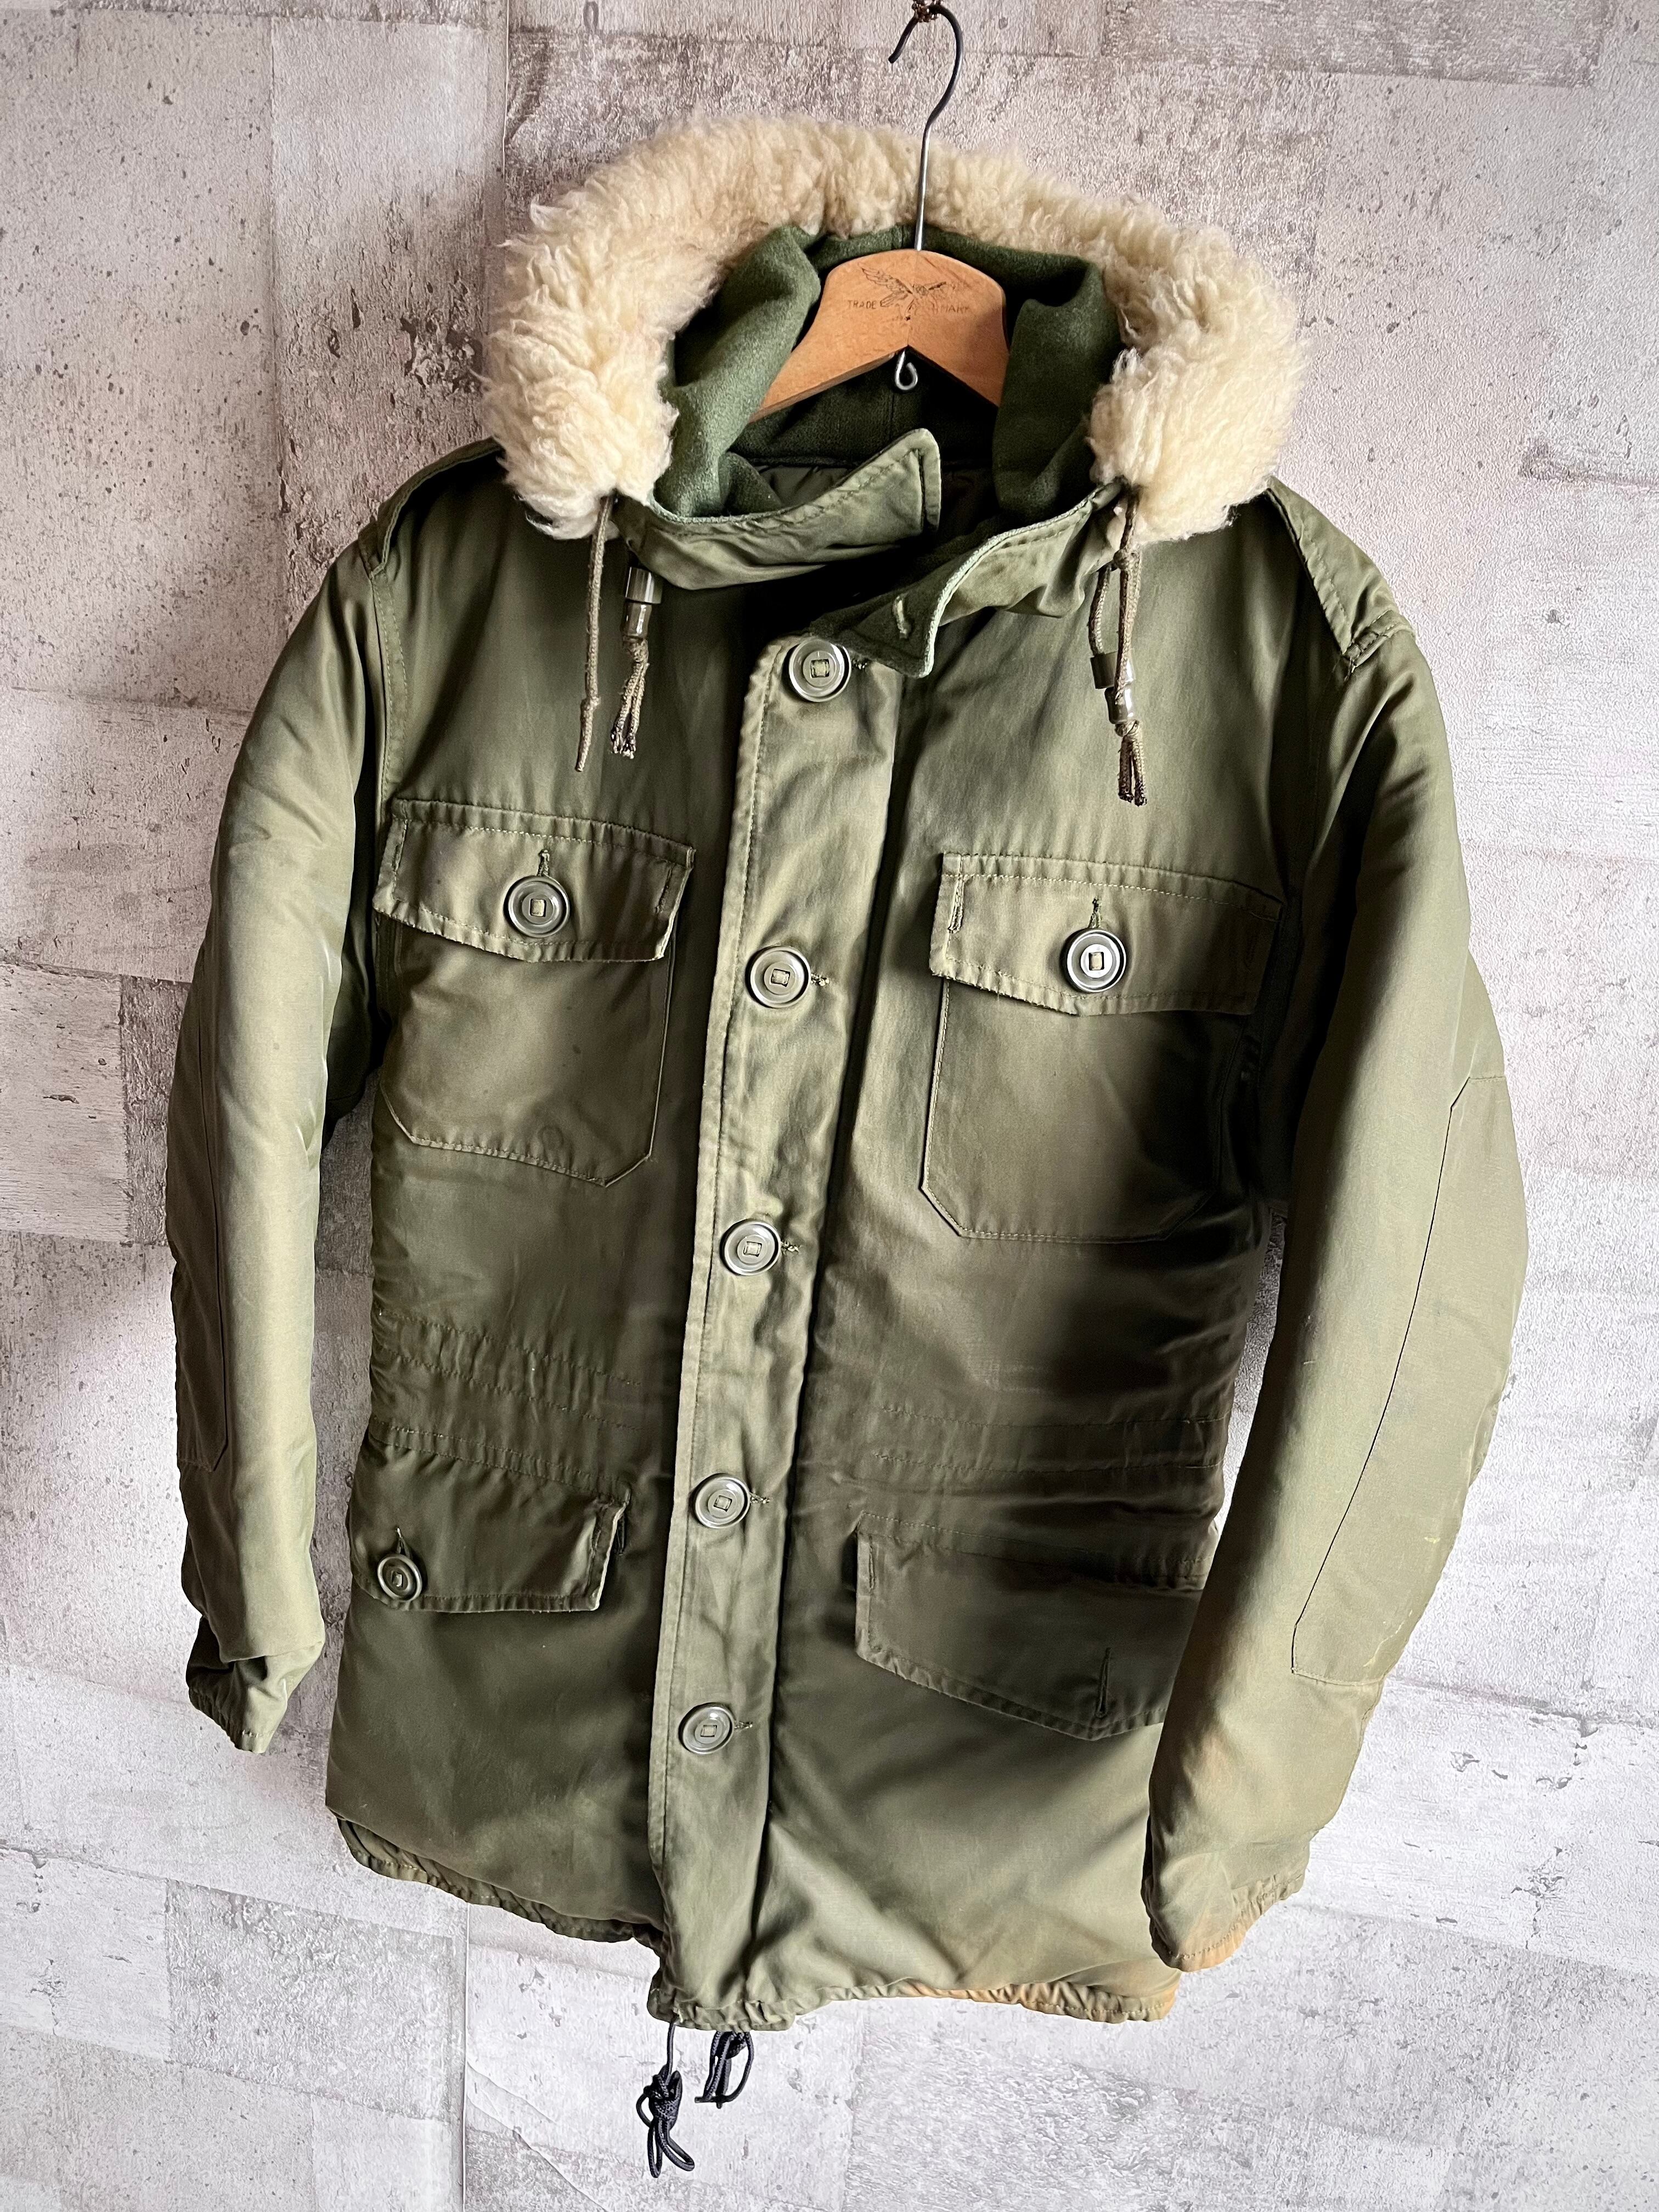 80s CANADIAN ARMY PARKA GENERAL PURPOSE 1987 OLD VINTAGE カナダ軍